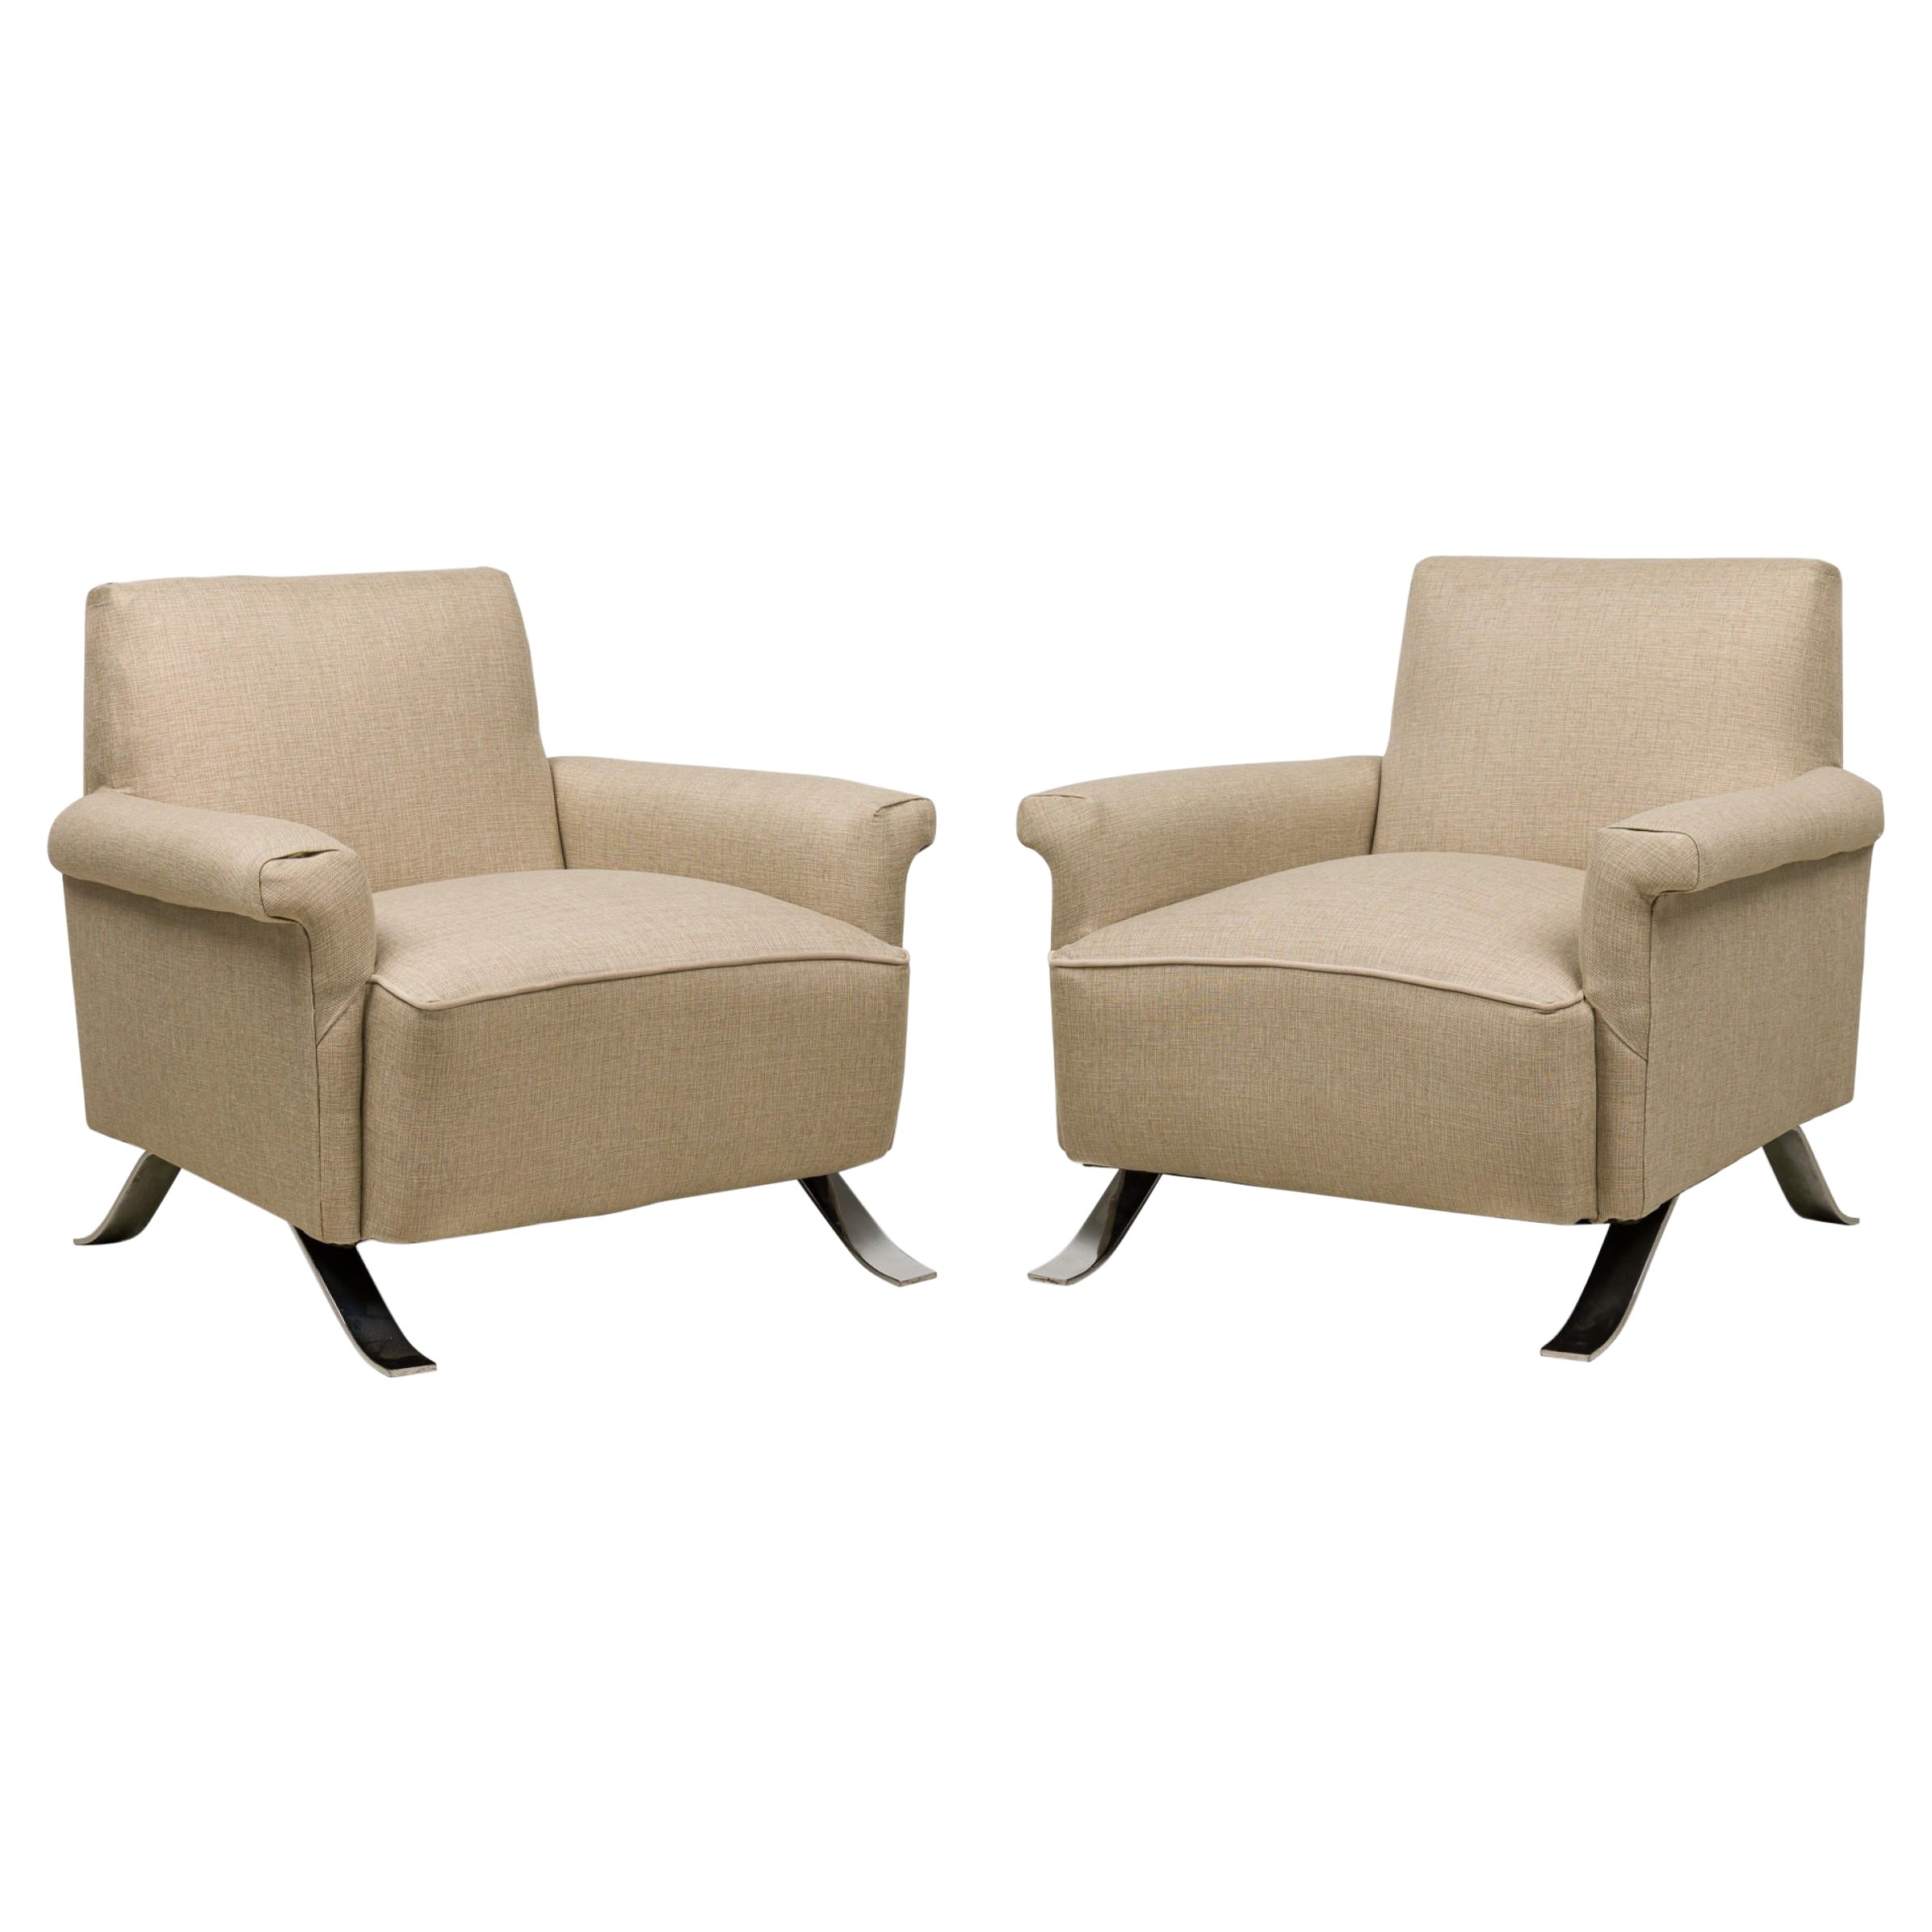 Pair of Mid-Century American Chrome Beige Fabric Upholstered Lounge / Armchairs